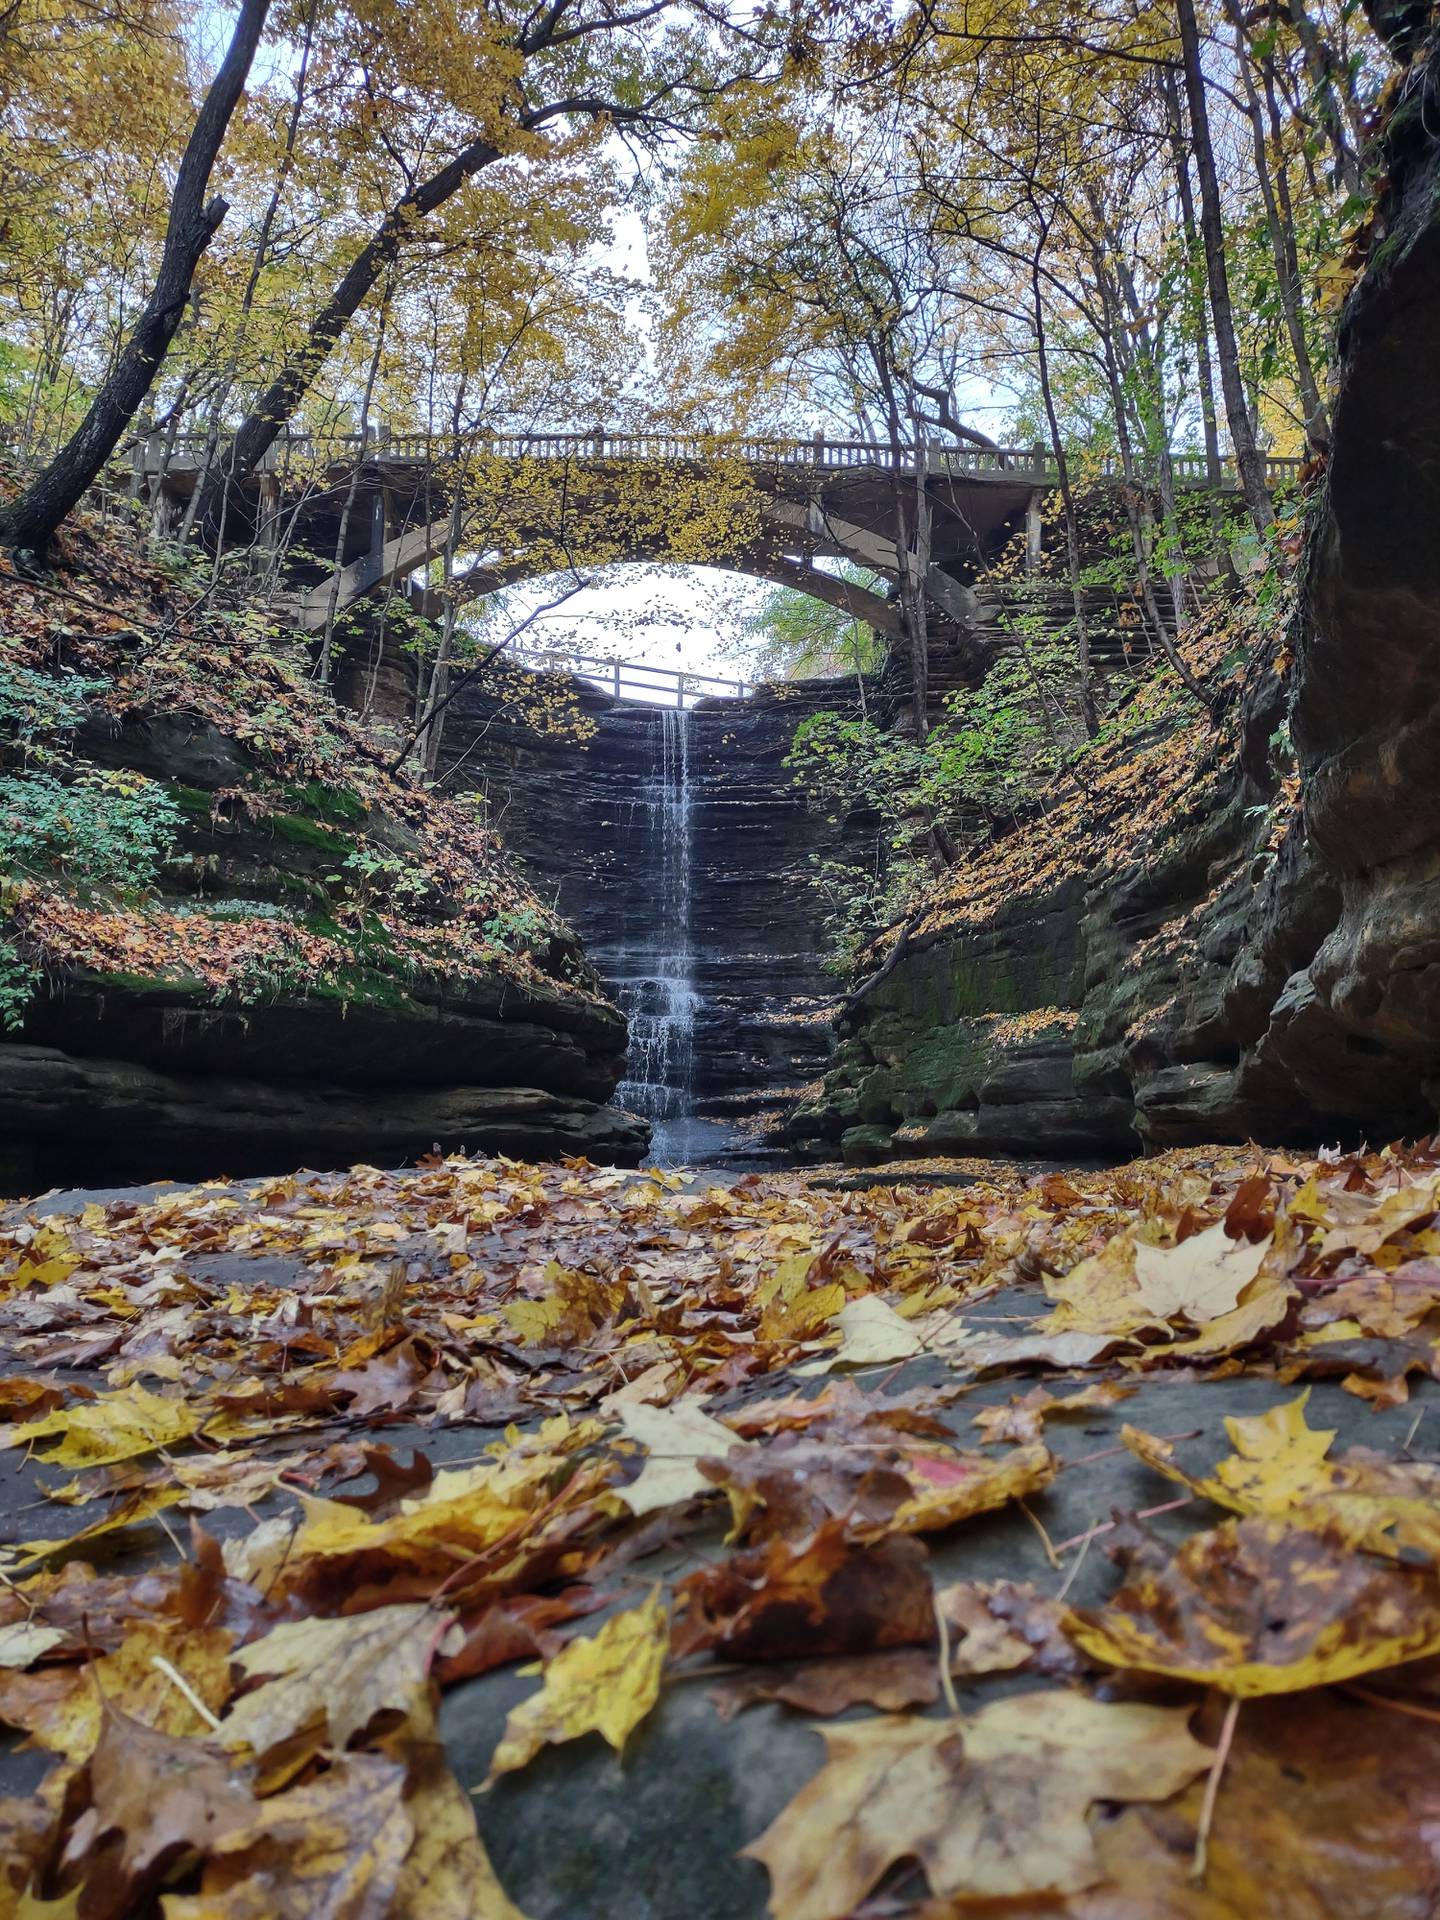 Lake Falls is one of the most popular destinations at Matthiessen State Park.